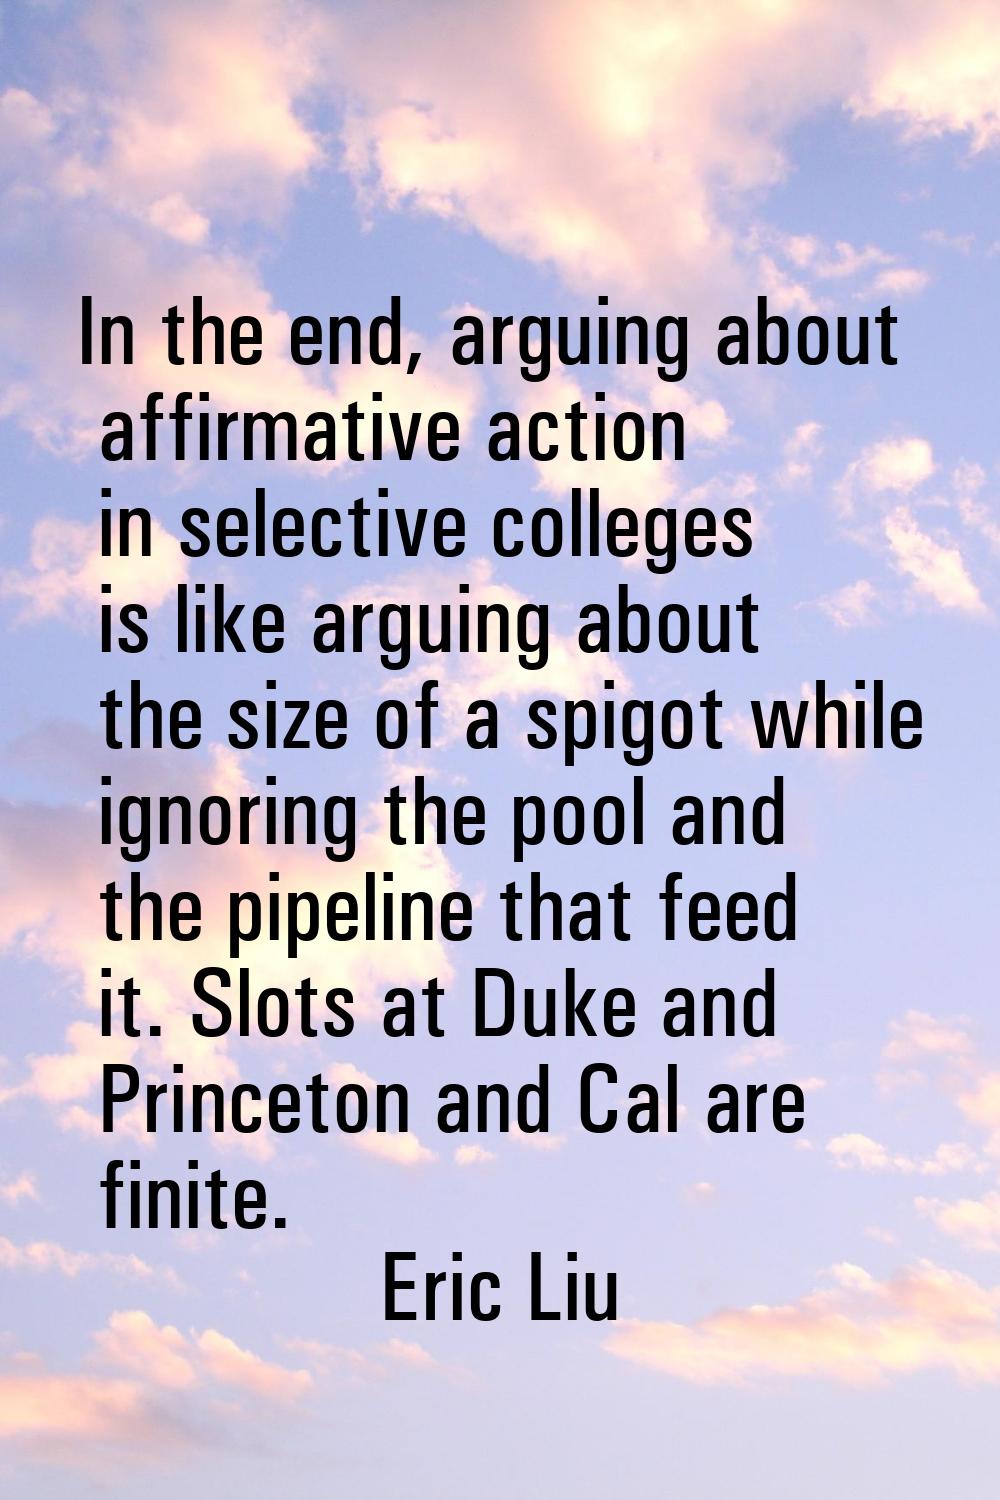 In the end, arguing about affirmative action in selective colleges is like arguing about the size o